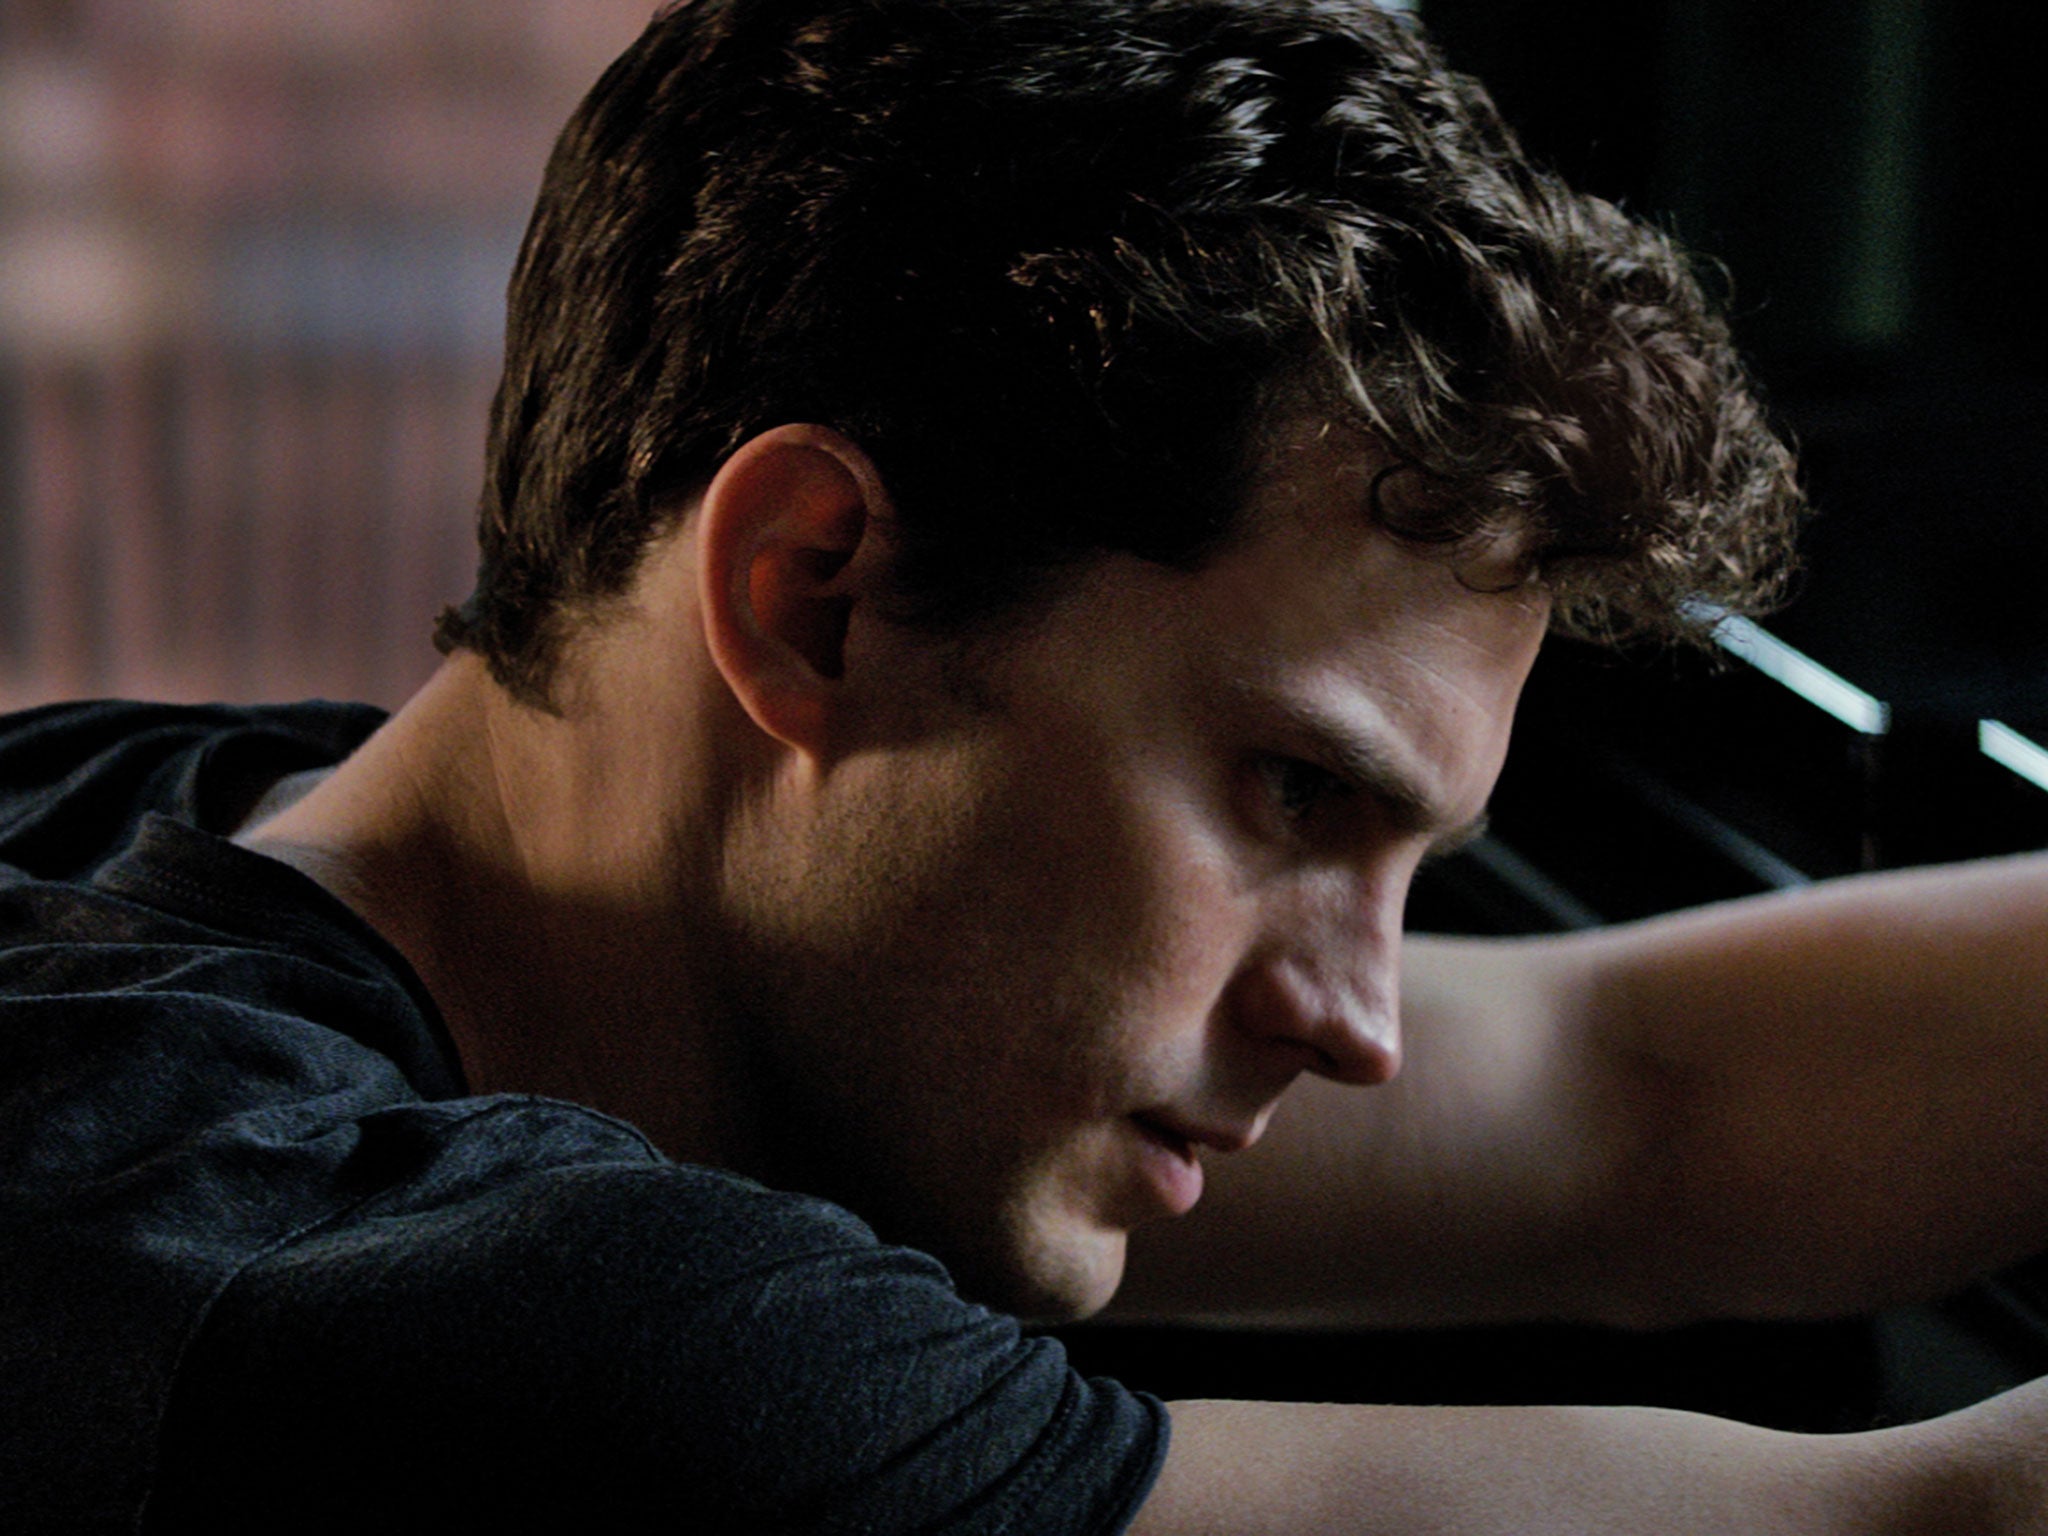 Jamie Dornan as Christian Grey in Fifty Shades of Grey, which has its world premiere at the Berlin Film Festival